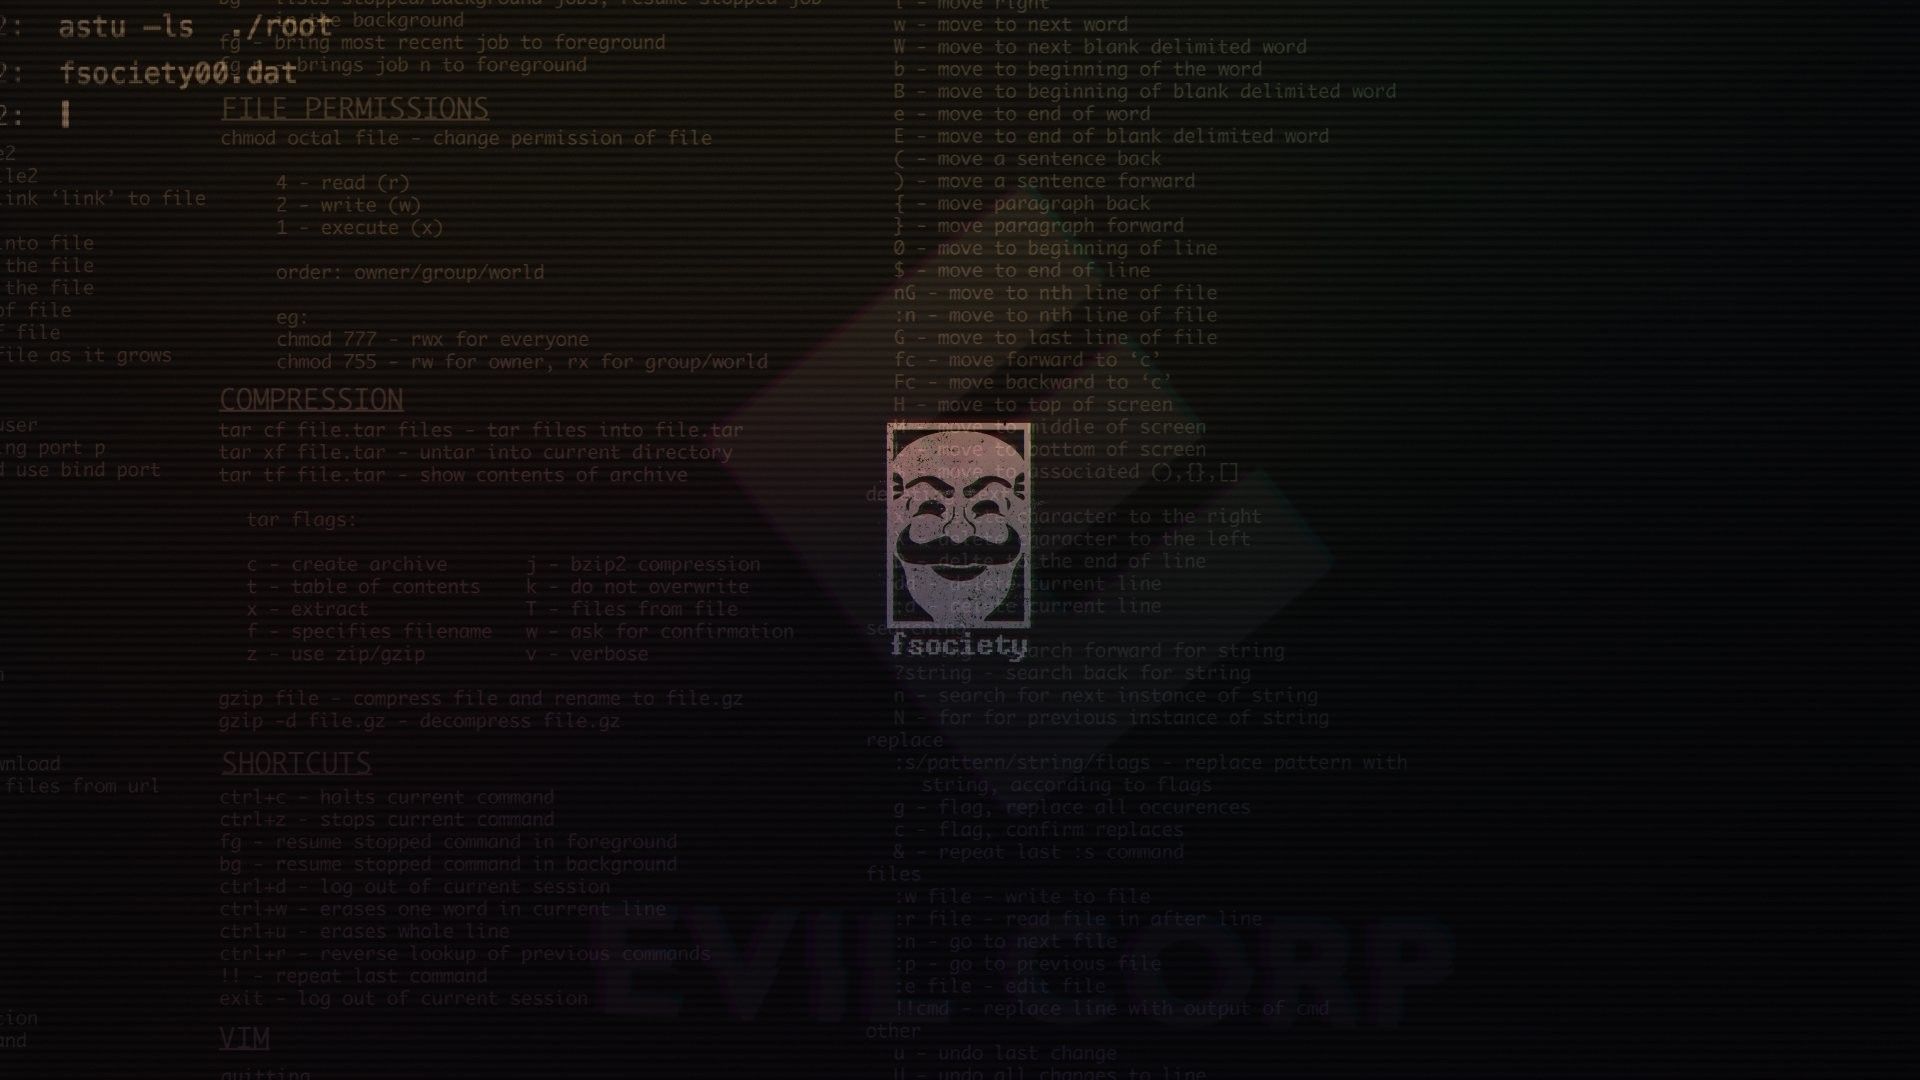 Linux Commands Wallpaper 1920x1080.GiftWatches.CO